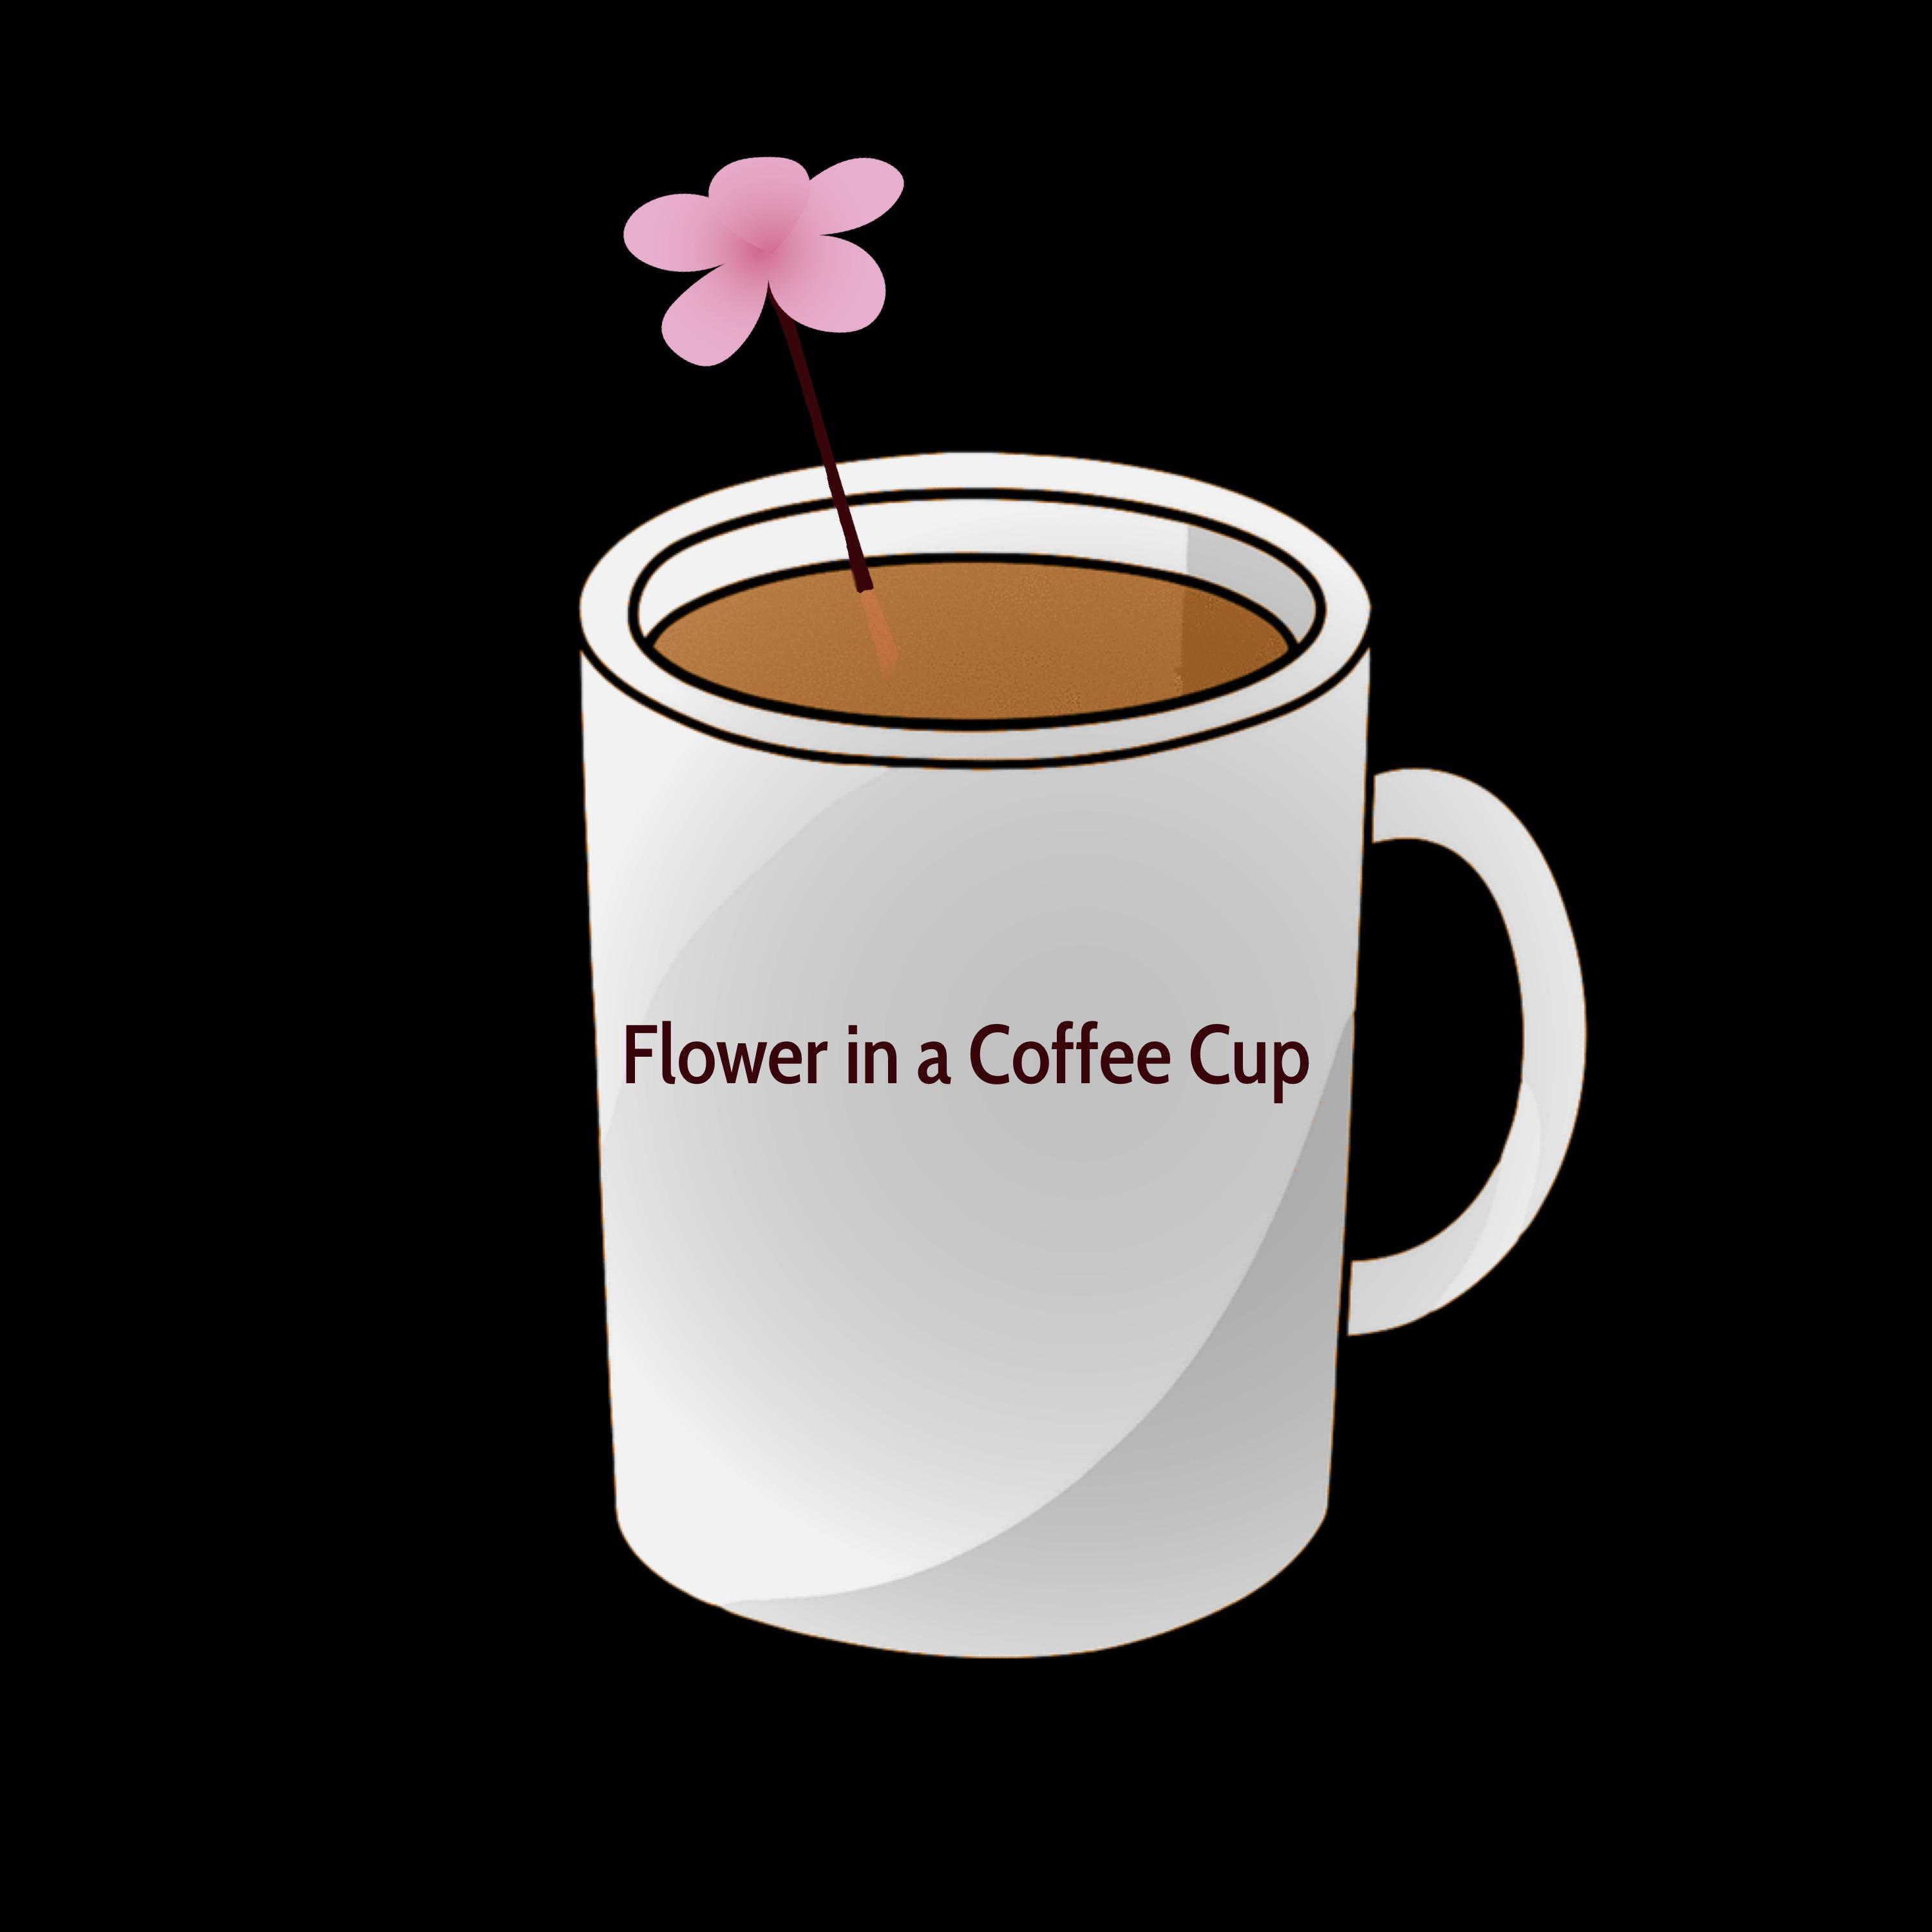 Flower in a Coffee Cup